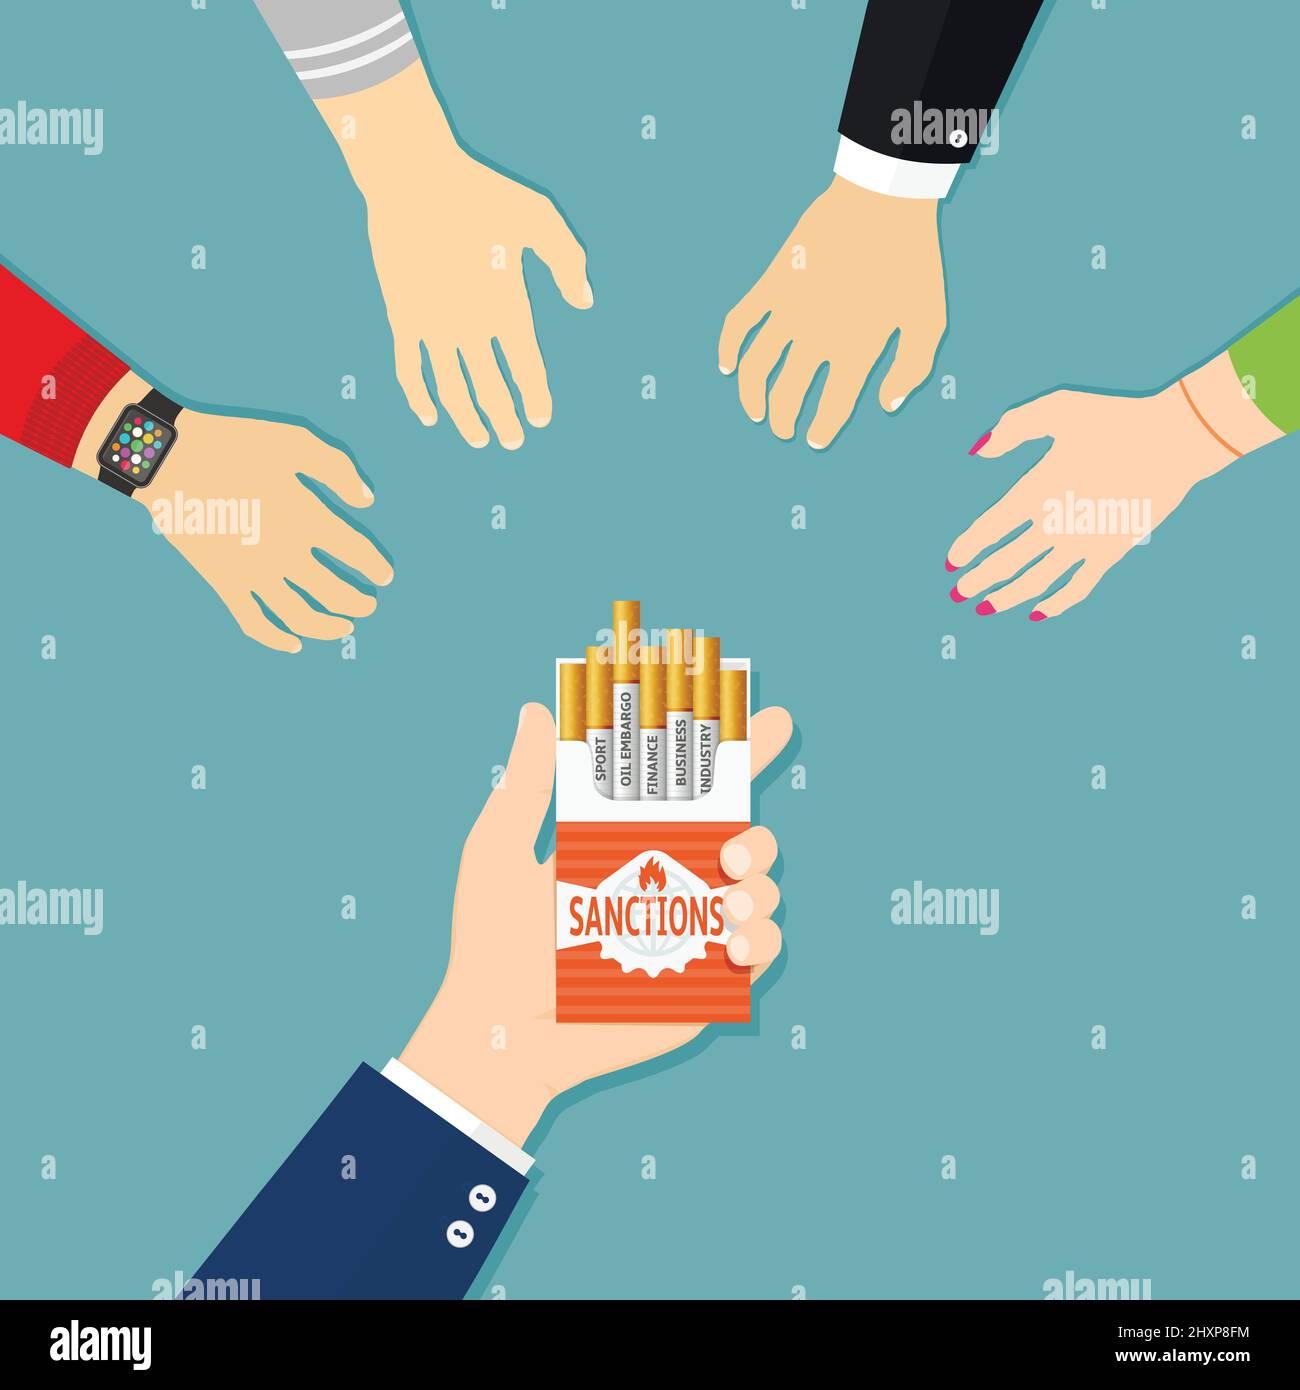 Concept of sanctions. Hands are reaching for cigarette pack with sanctions. Flat design illustration. Stock Vector